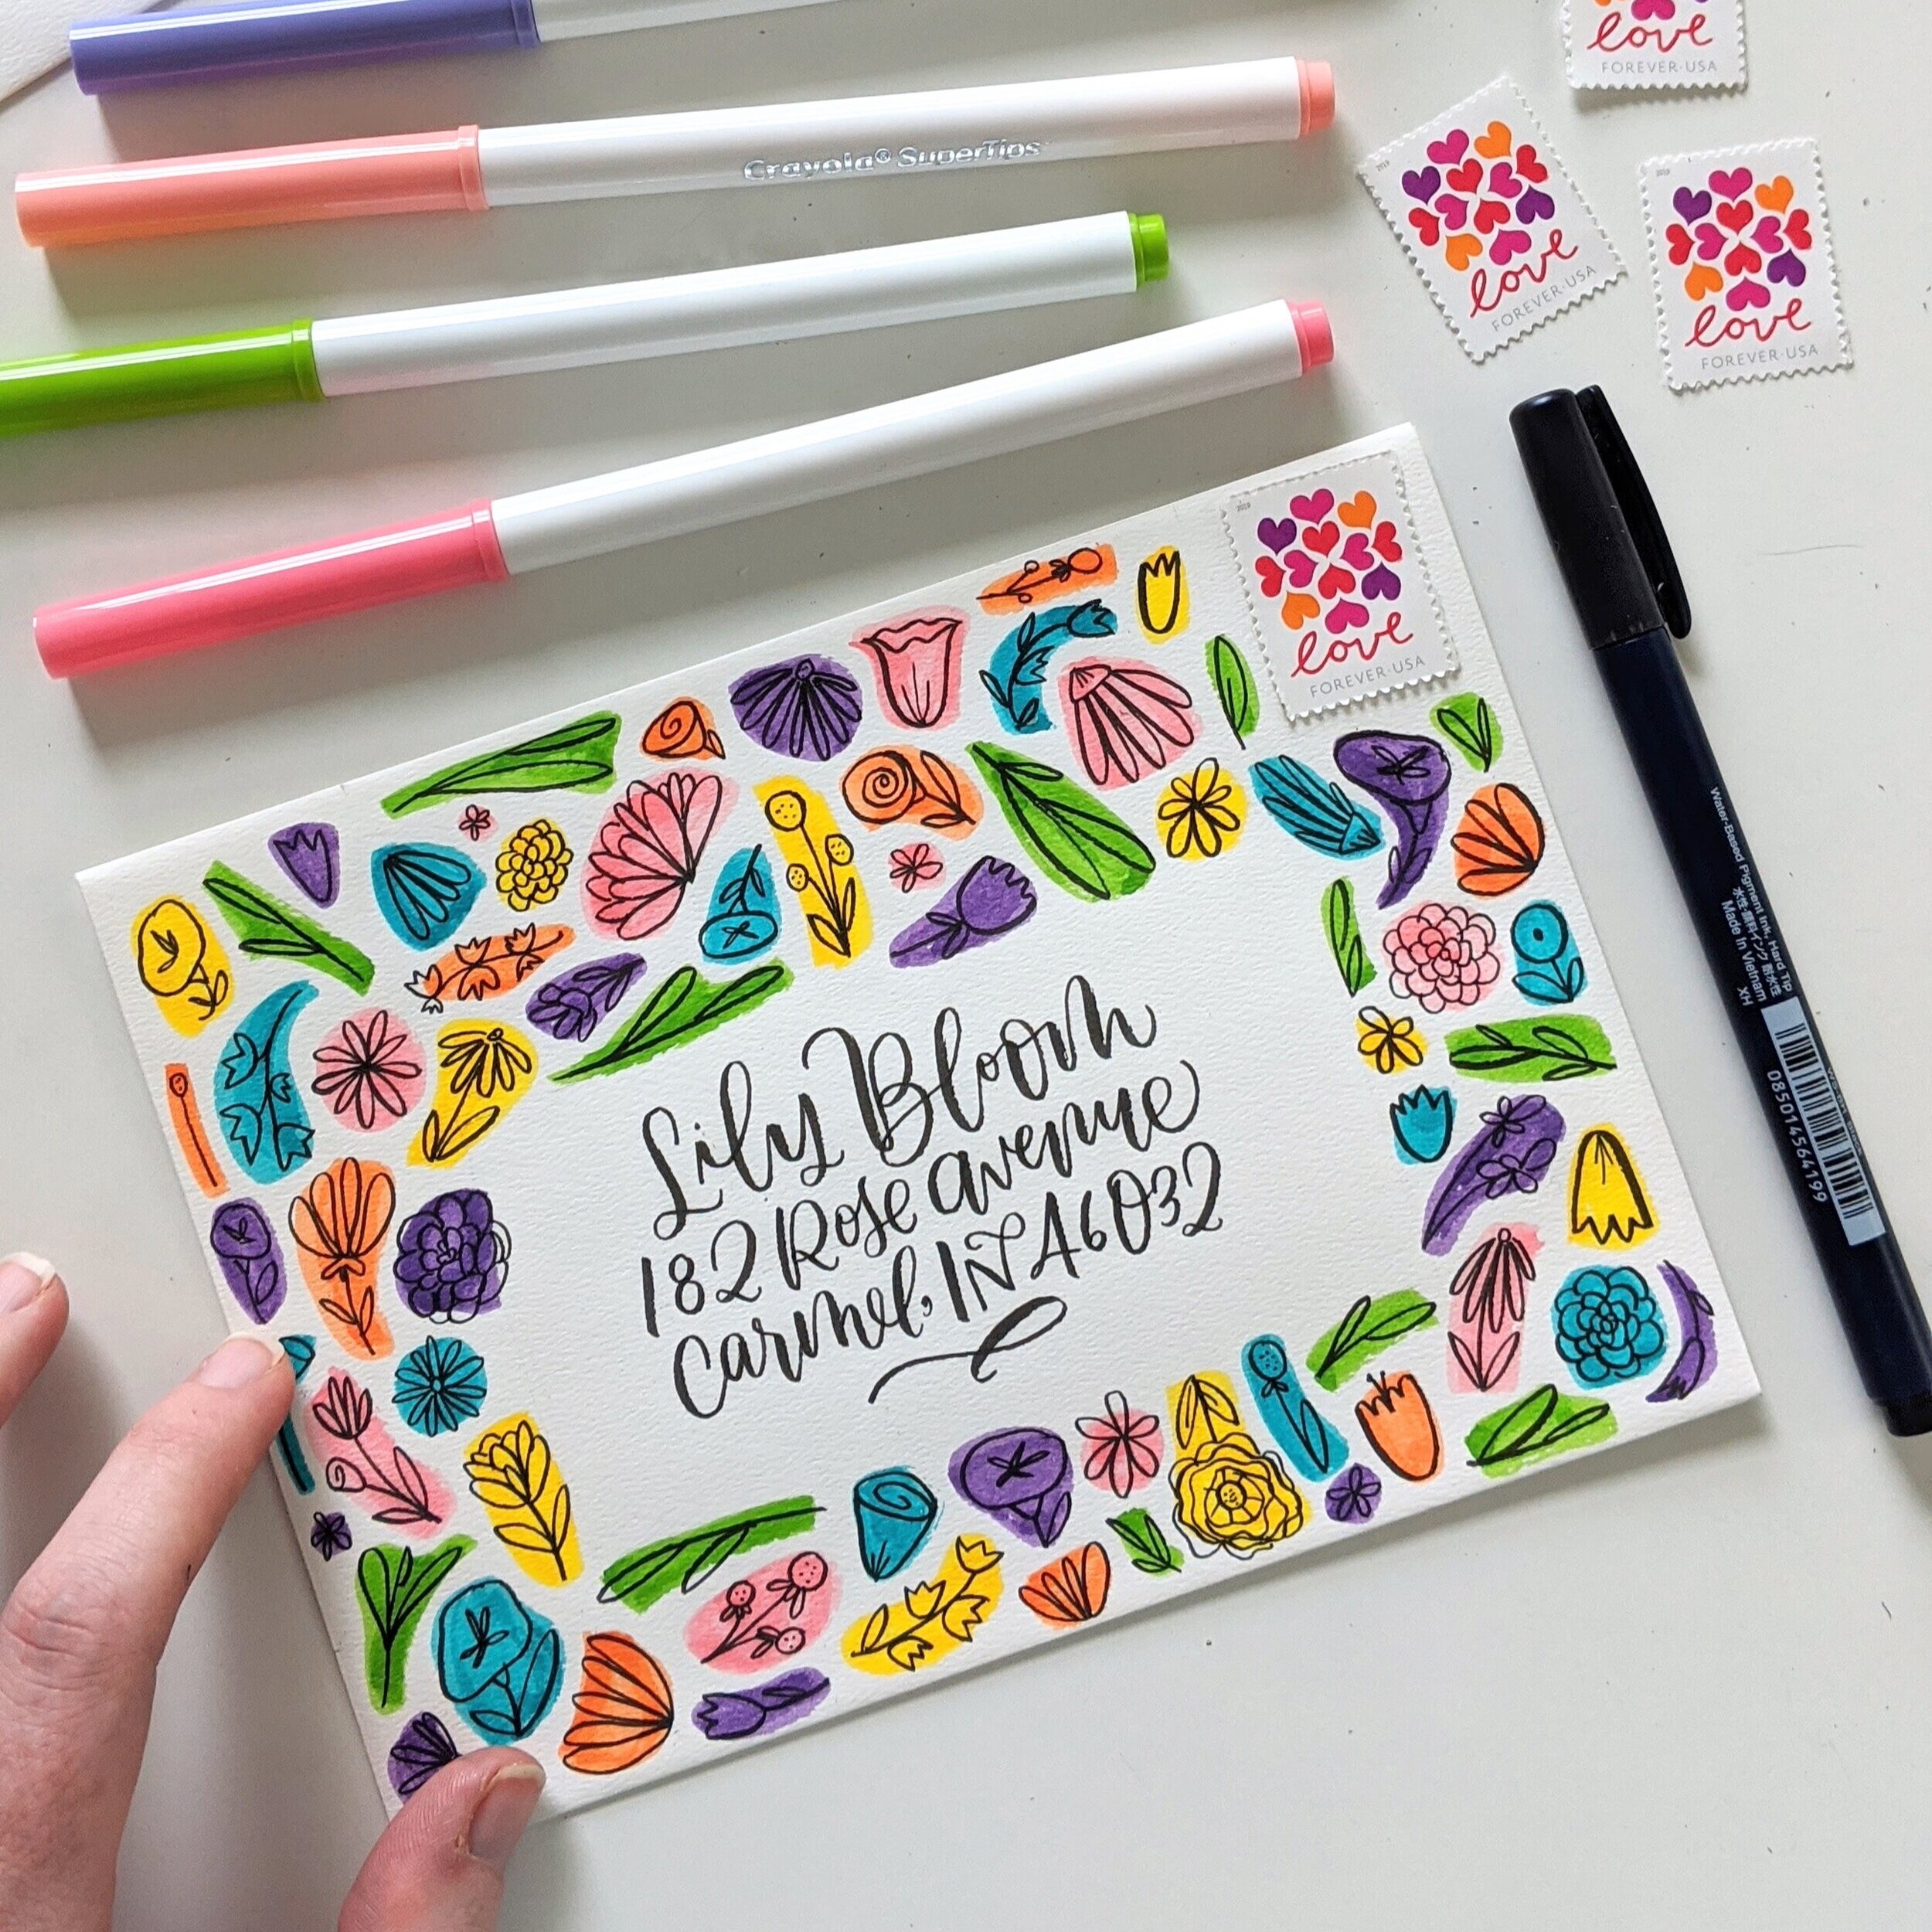 Remember these?! - ART WITH STAMP MARKERS 